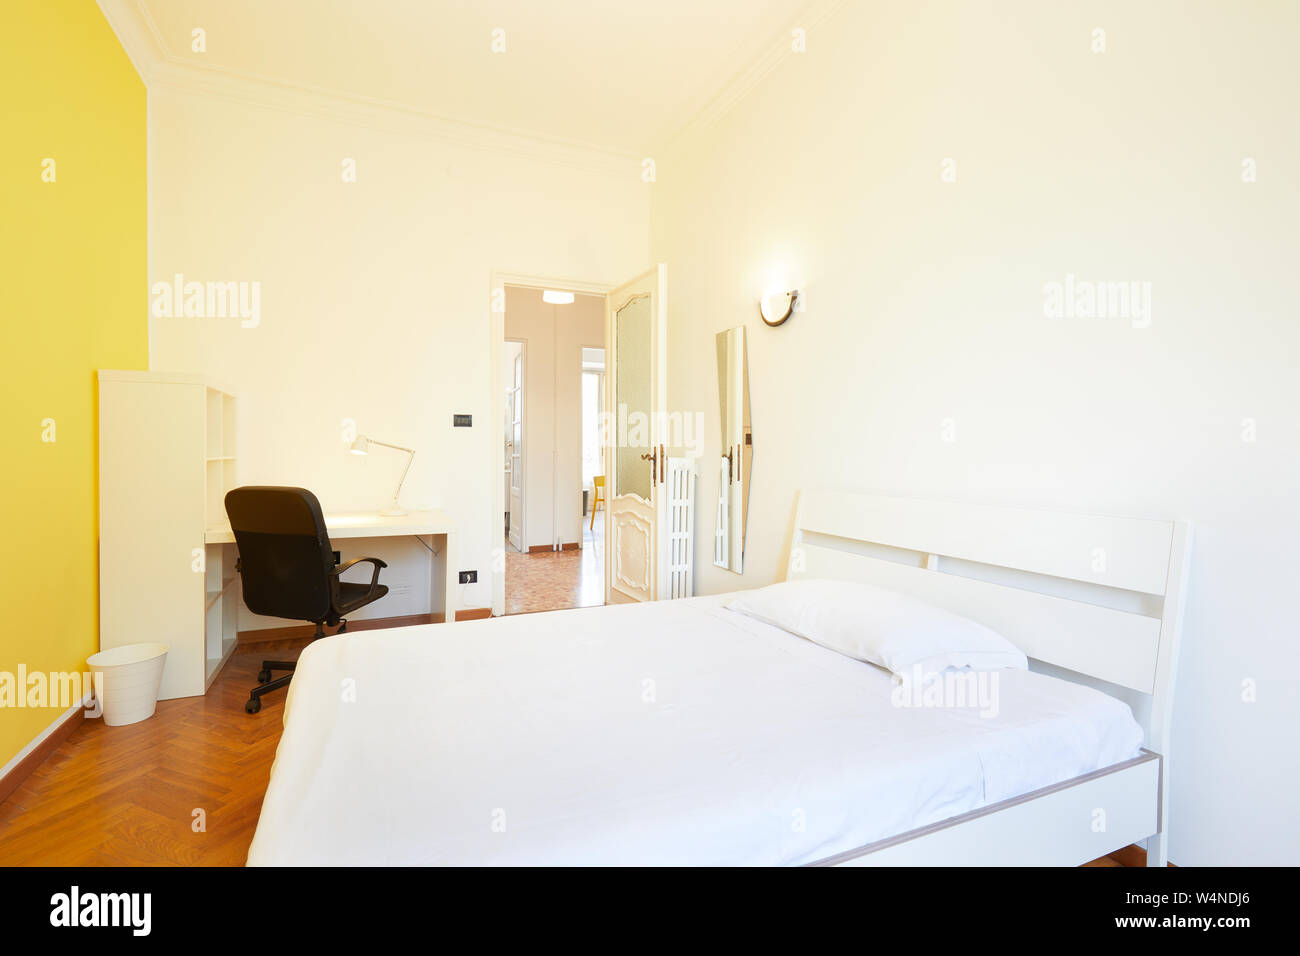 Bedroom interior in renovated apartment with parquet floor and yellow wall Stock Photo